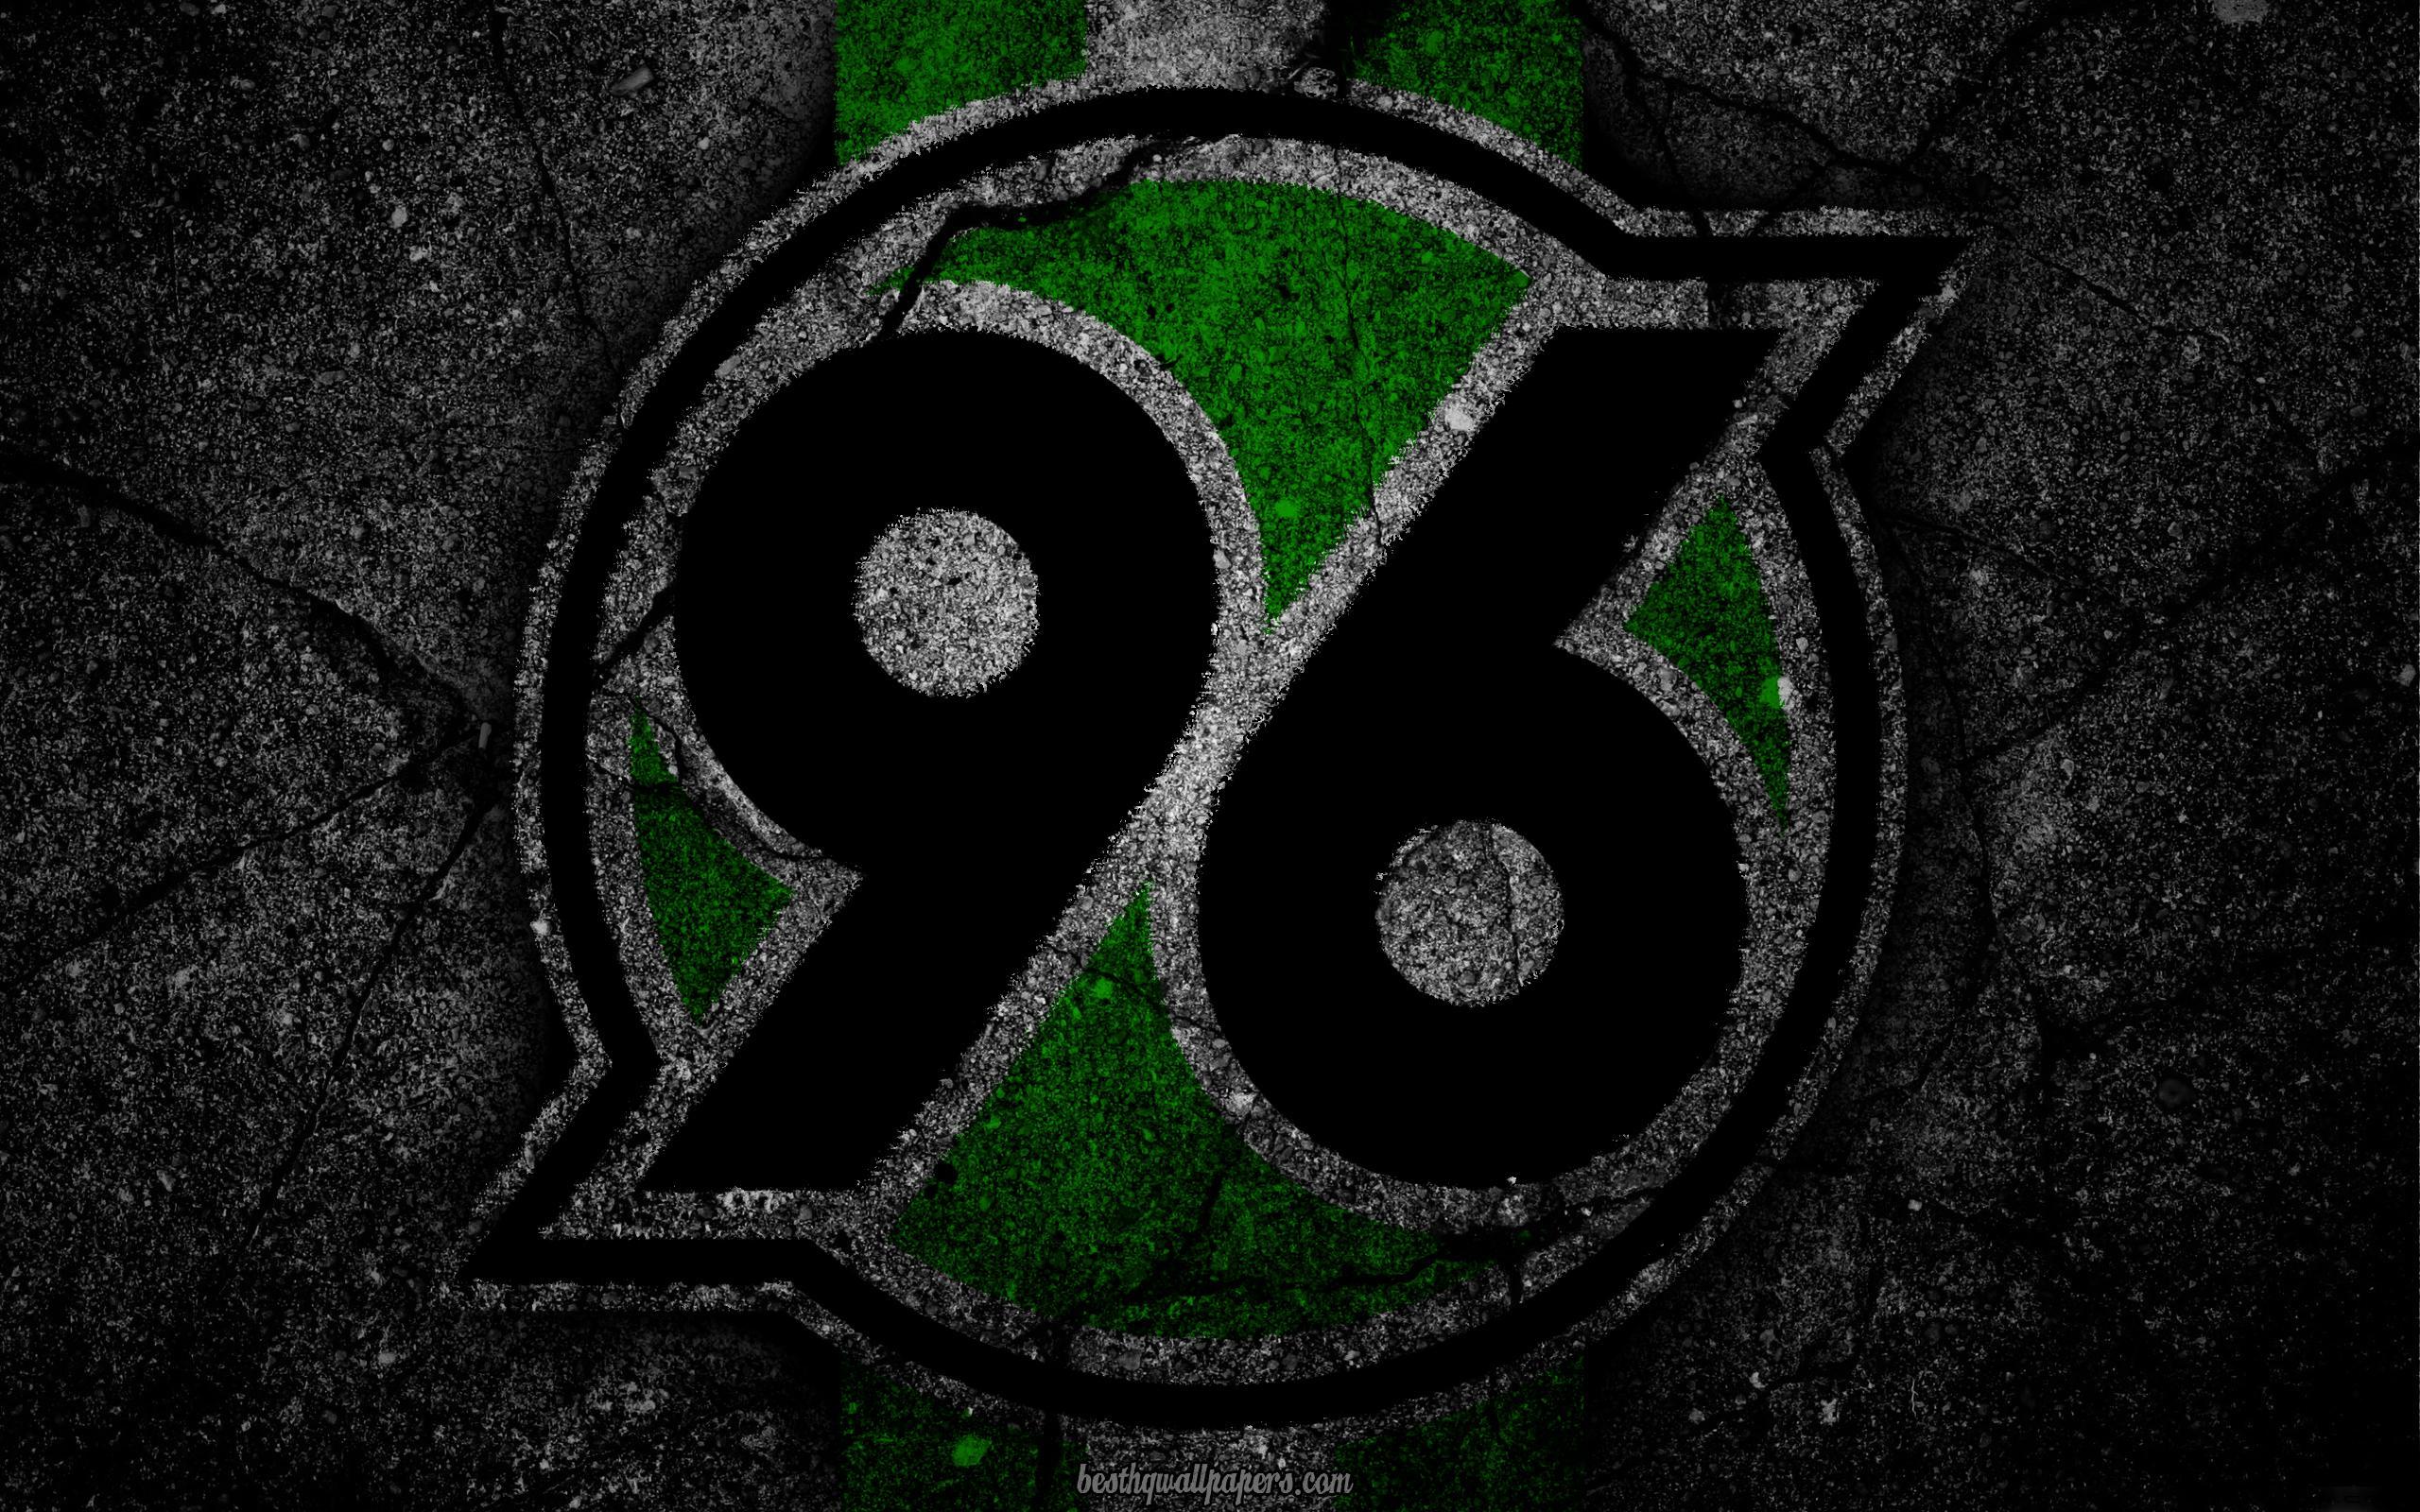 Hannover 96 Wallpapers Wallpaper Cave